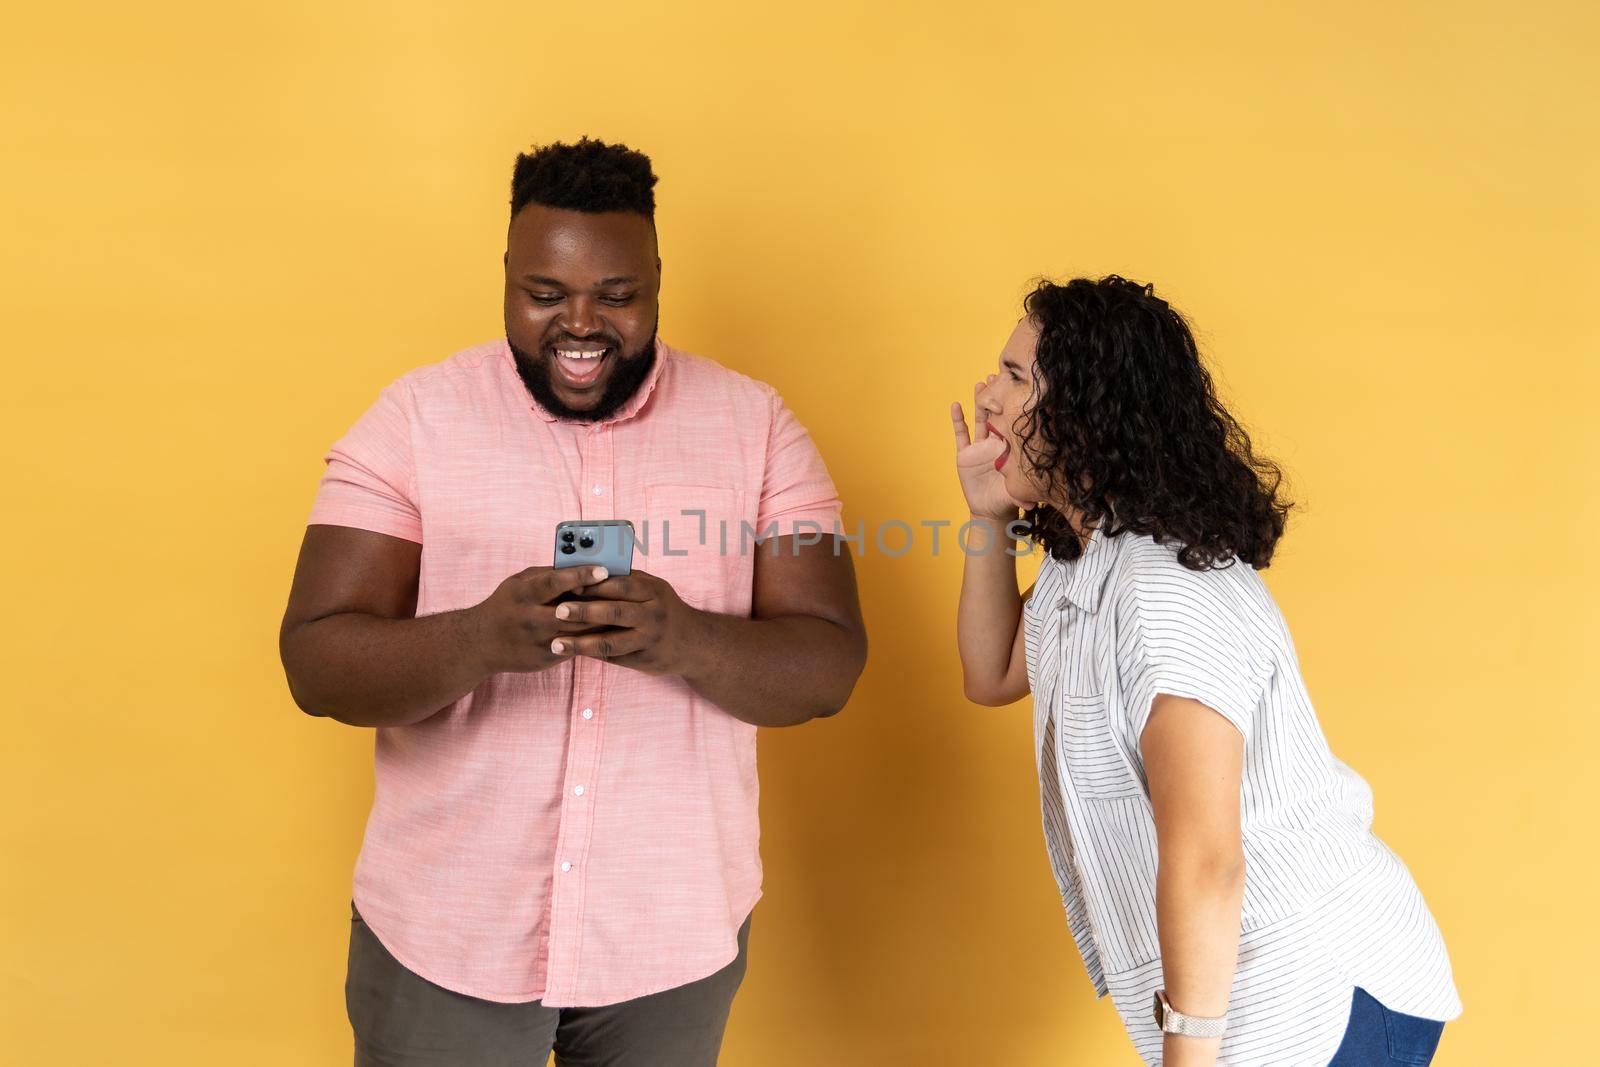 Young couple in casual clothing standing together, woman desperately screaming near happy man using phone and ignoring her, attracting his attention. Indoor studio shot isolated on yellow background.